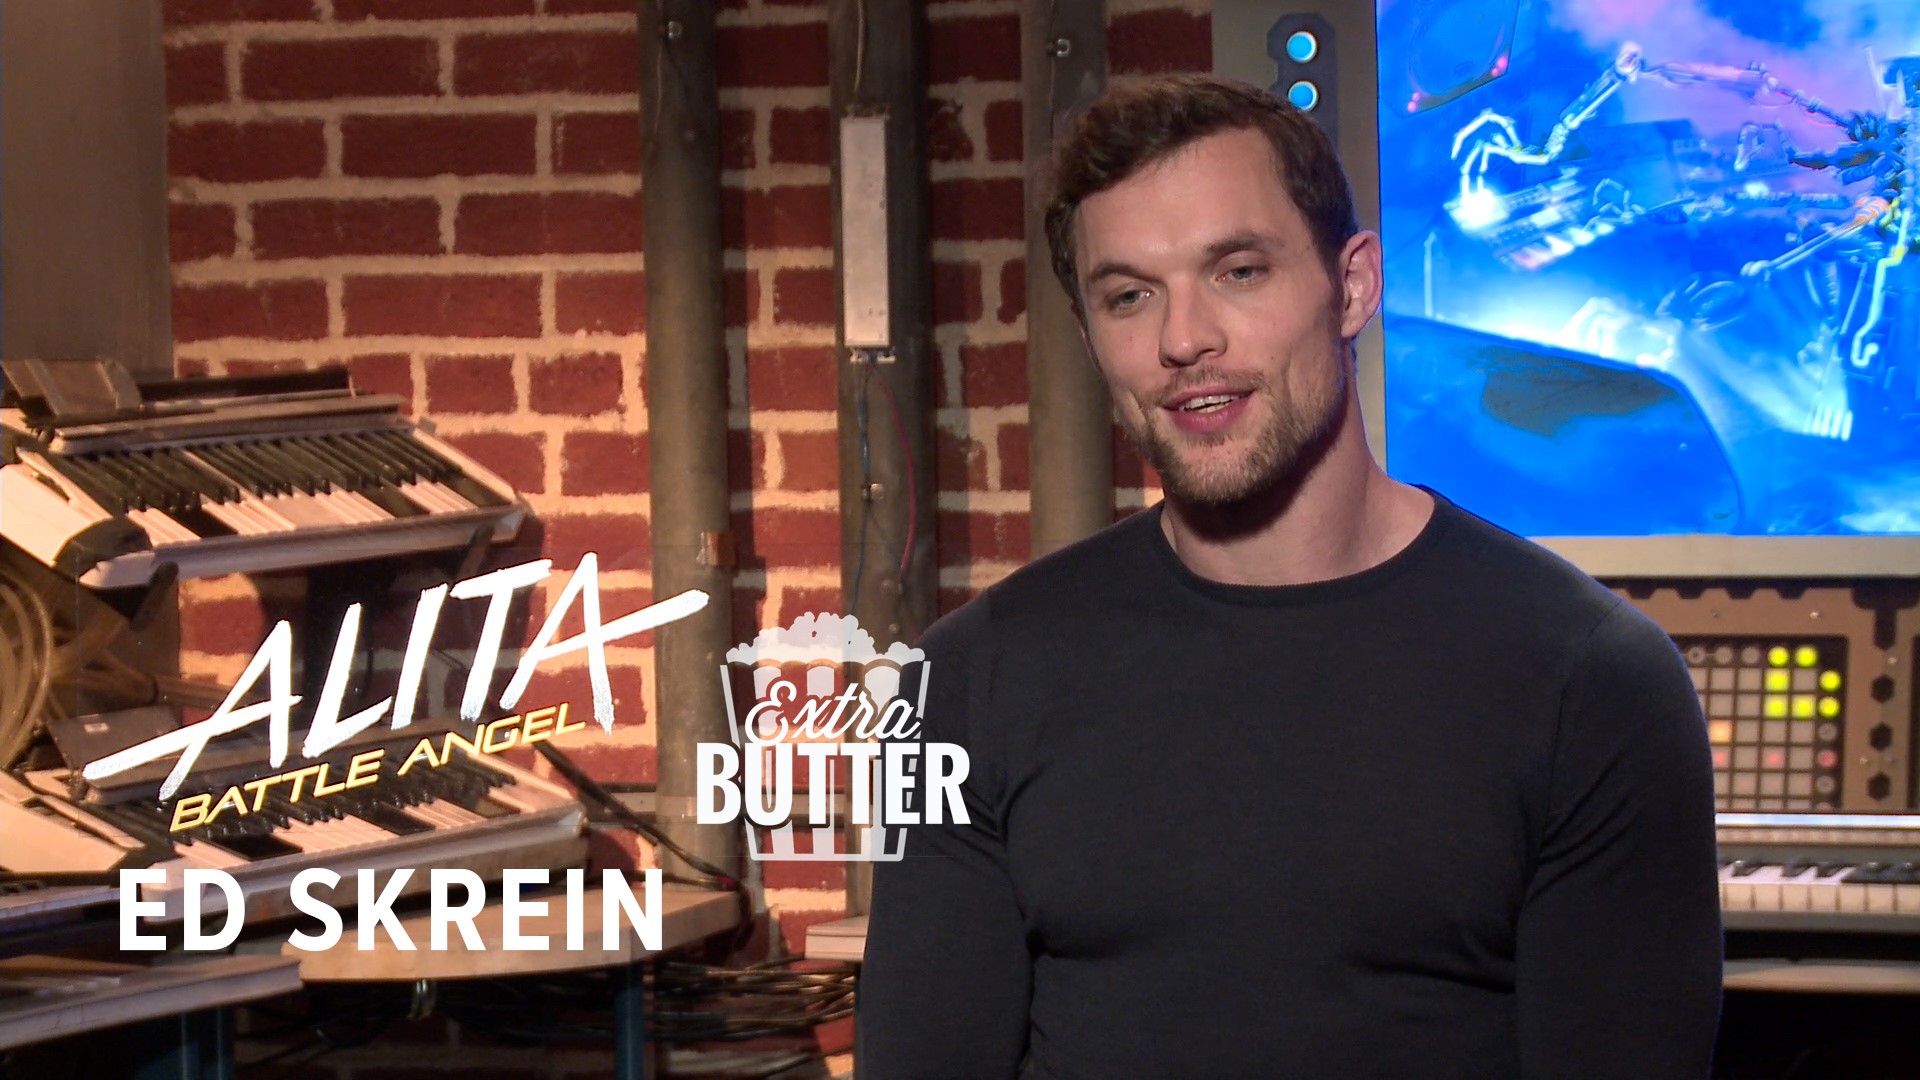 Ed Skrein talks with Mark S. Allen about how previous roles such as 'Game of Thrones' and 'If Beale Street Could Talk' prepared him for 'Alita.' He also talks about not being as busy as he might look and the nasty injury his stunt double suffered during the bar scene. Interview arranged by 20th Century Fox.